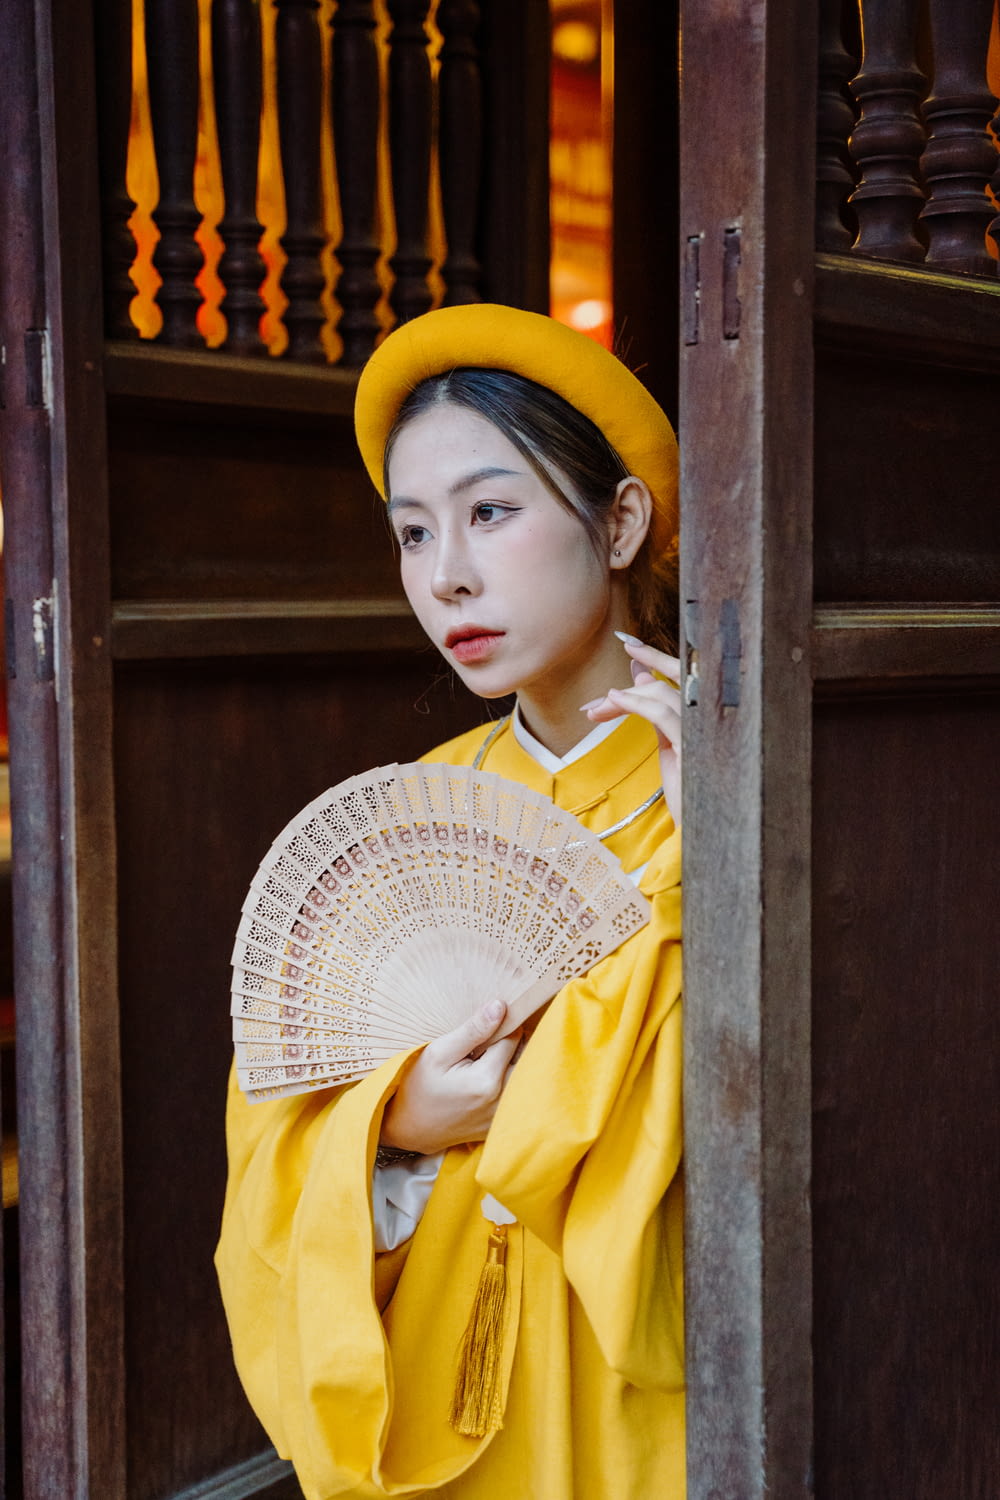 a woman in a yellow outfit holding a fan